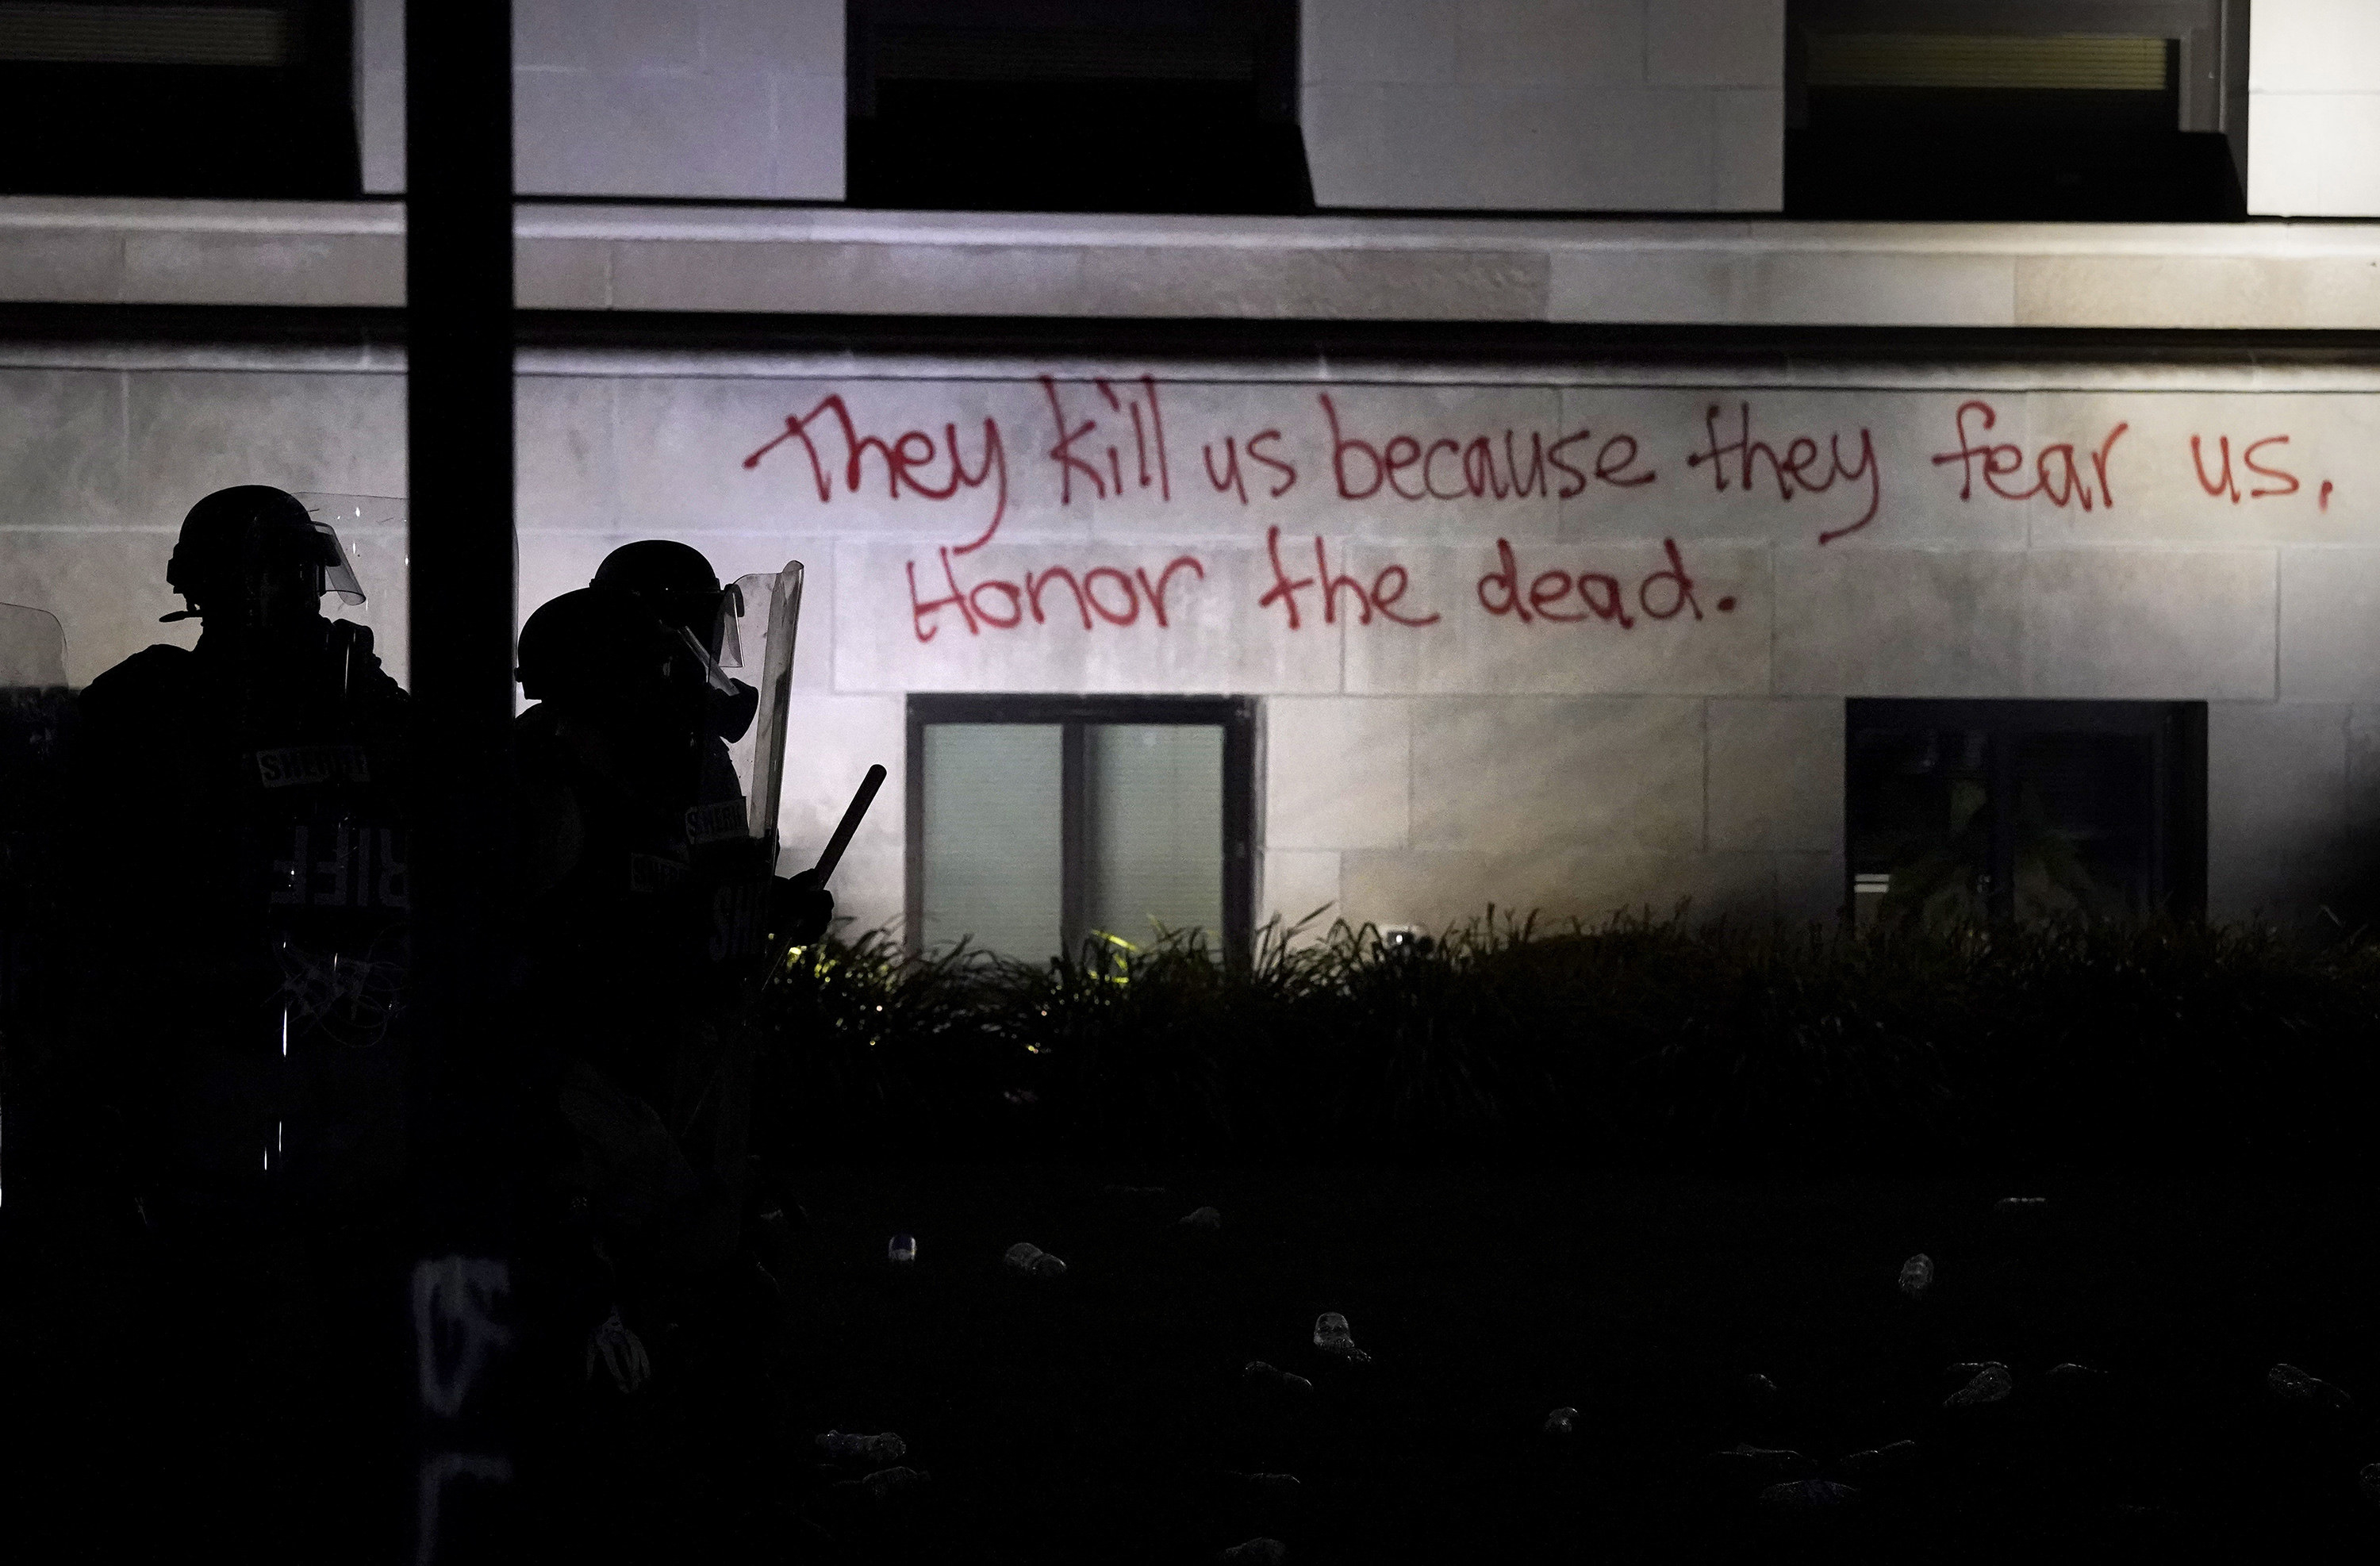 Spraypaint on the outside wall of the courthouse reads, &quot;They kill us because they fear us. Honor the dead.&quot;